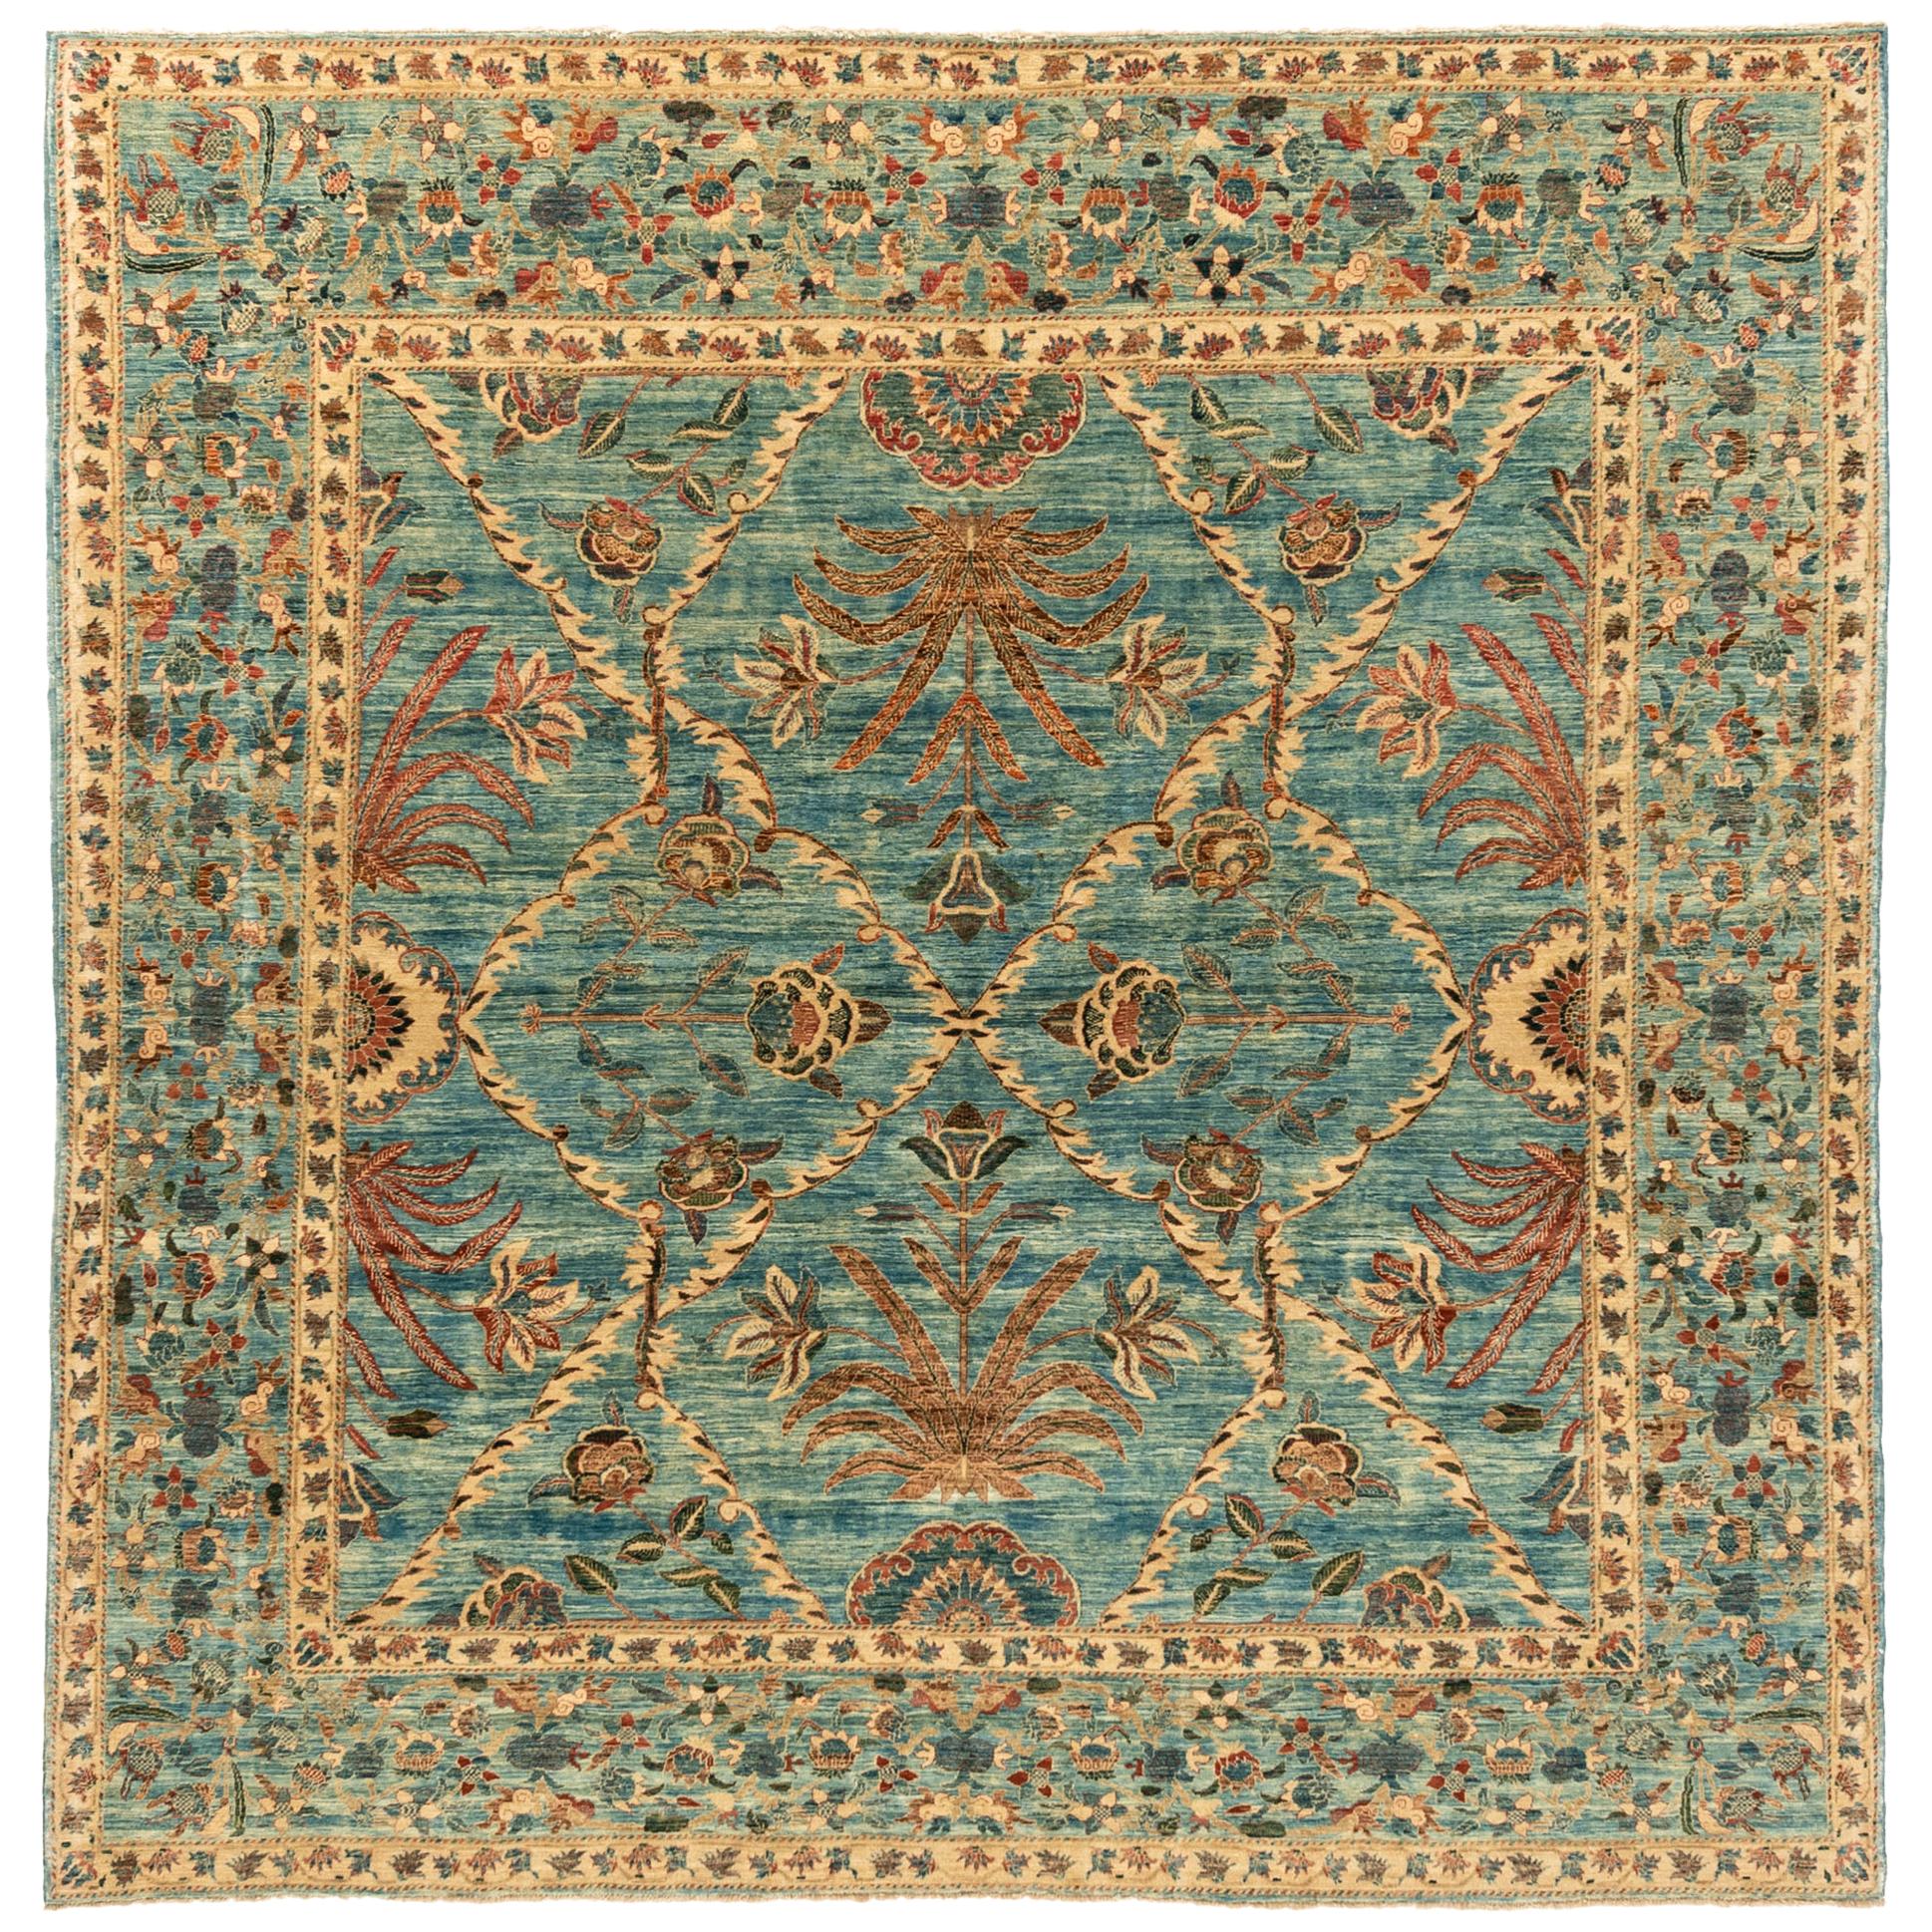 New Afghan Transitional Delicate Floral Design Rug with a Light Blue Main Field